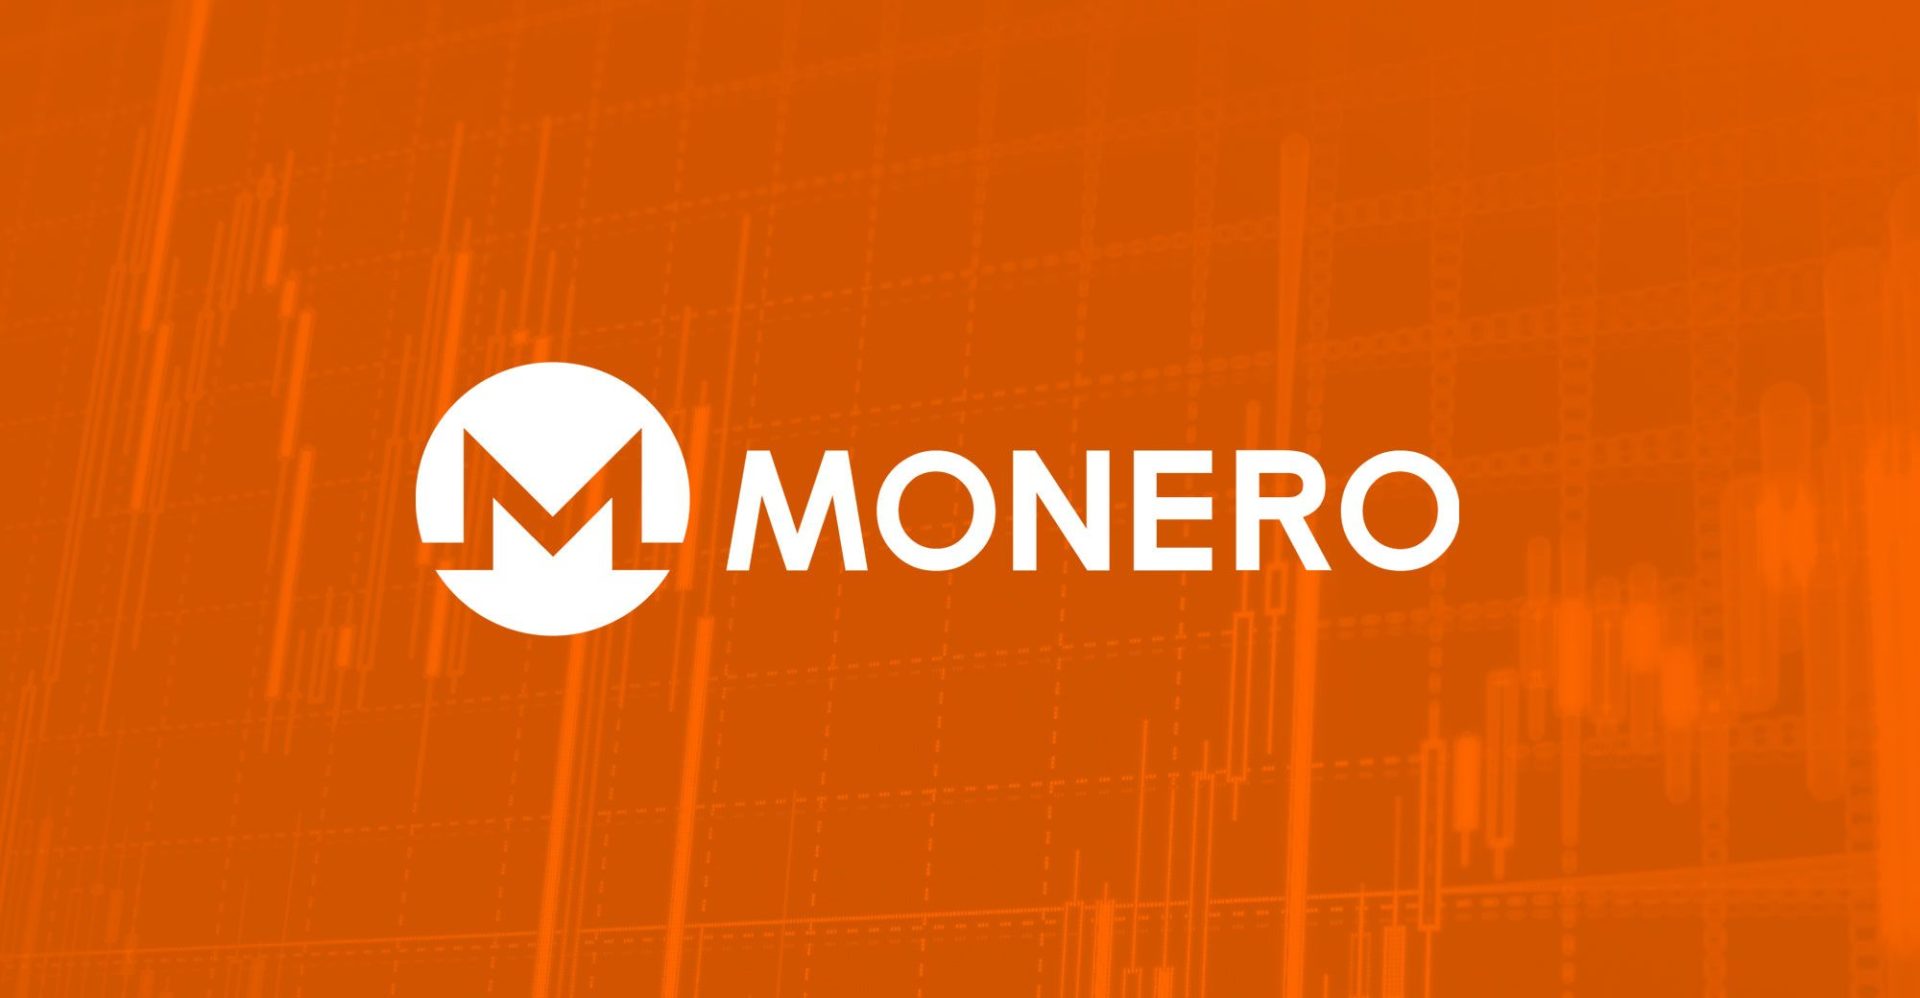 Monero (XMR) Coinhive Miner Rakes In Over $120,000 A Month